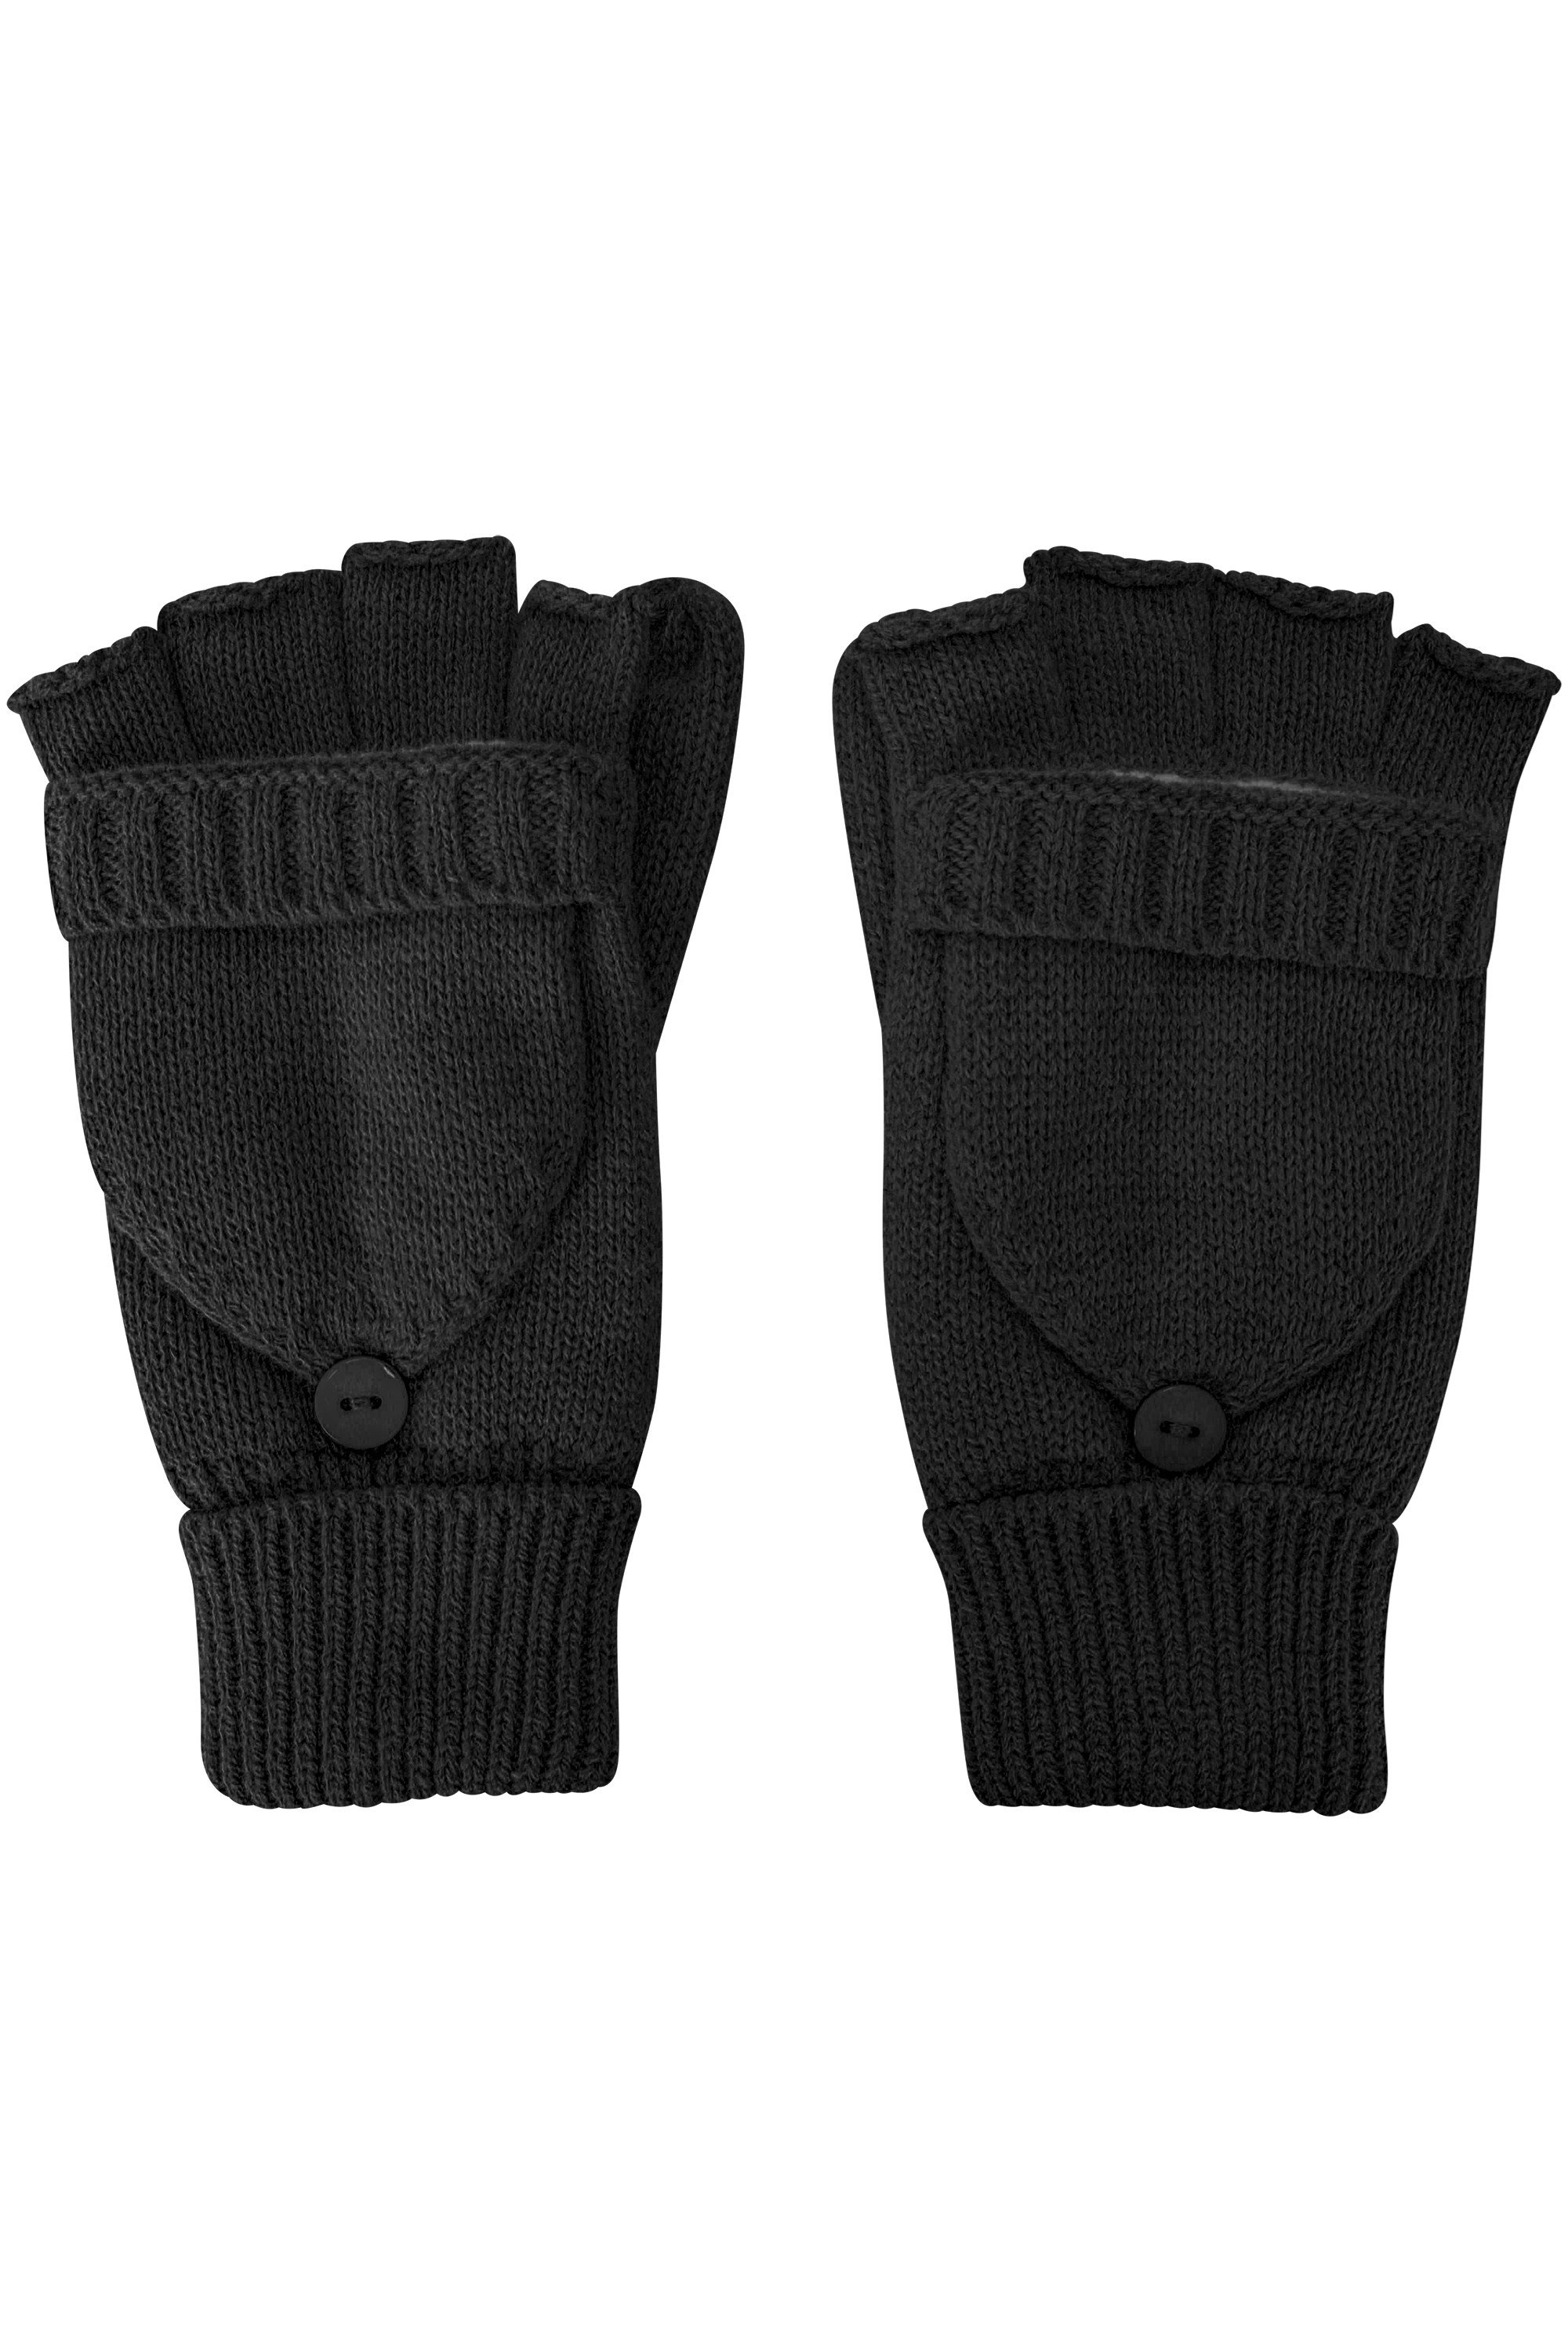 Ideal for Cycling Mountain Warehouse Salzburg Knitted Stripe Womens Mittens Driving & Daily Use Soft Ladies Winter Glove Warm & Cosy Handwear 